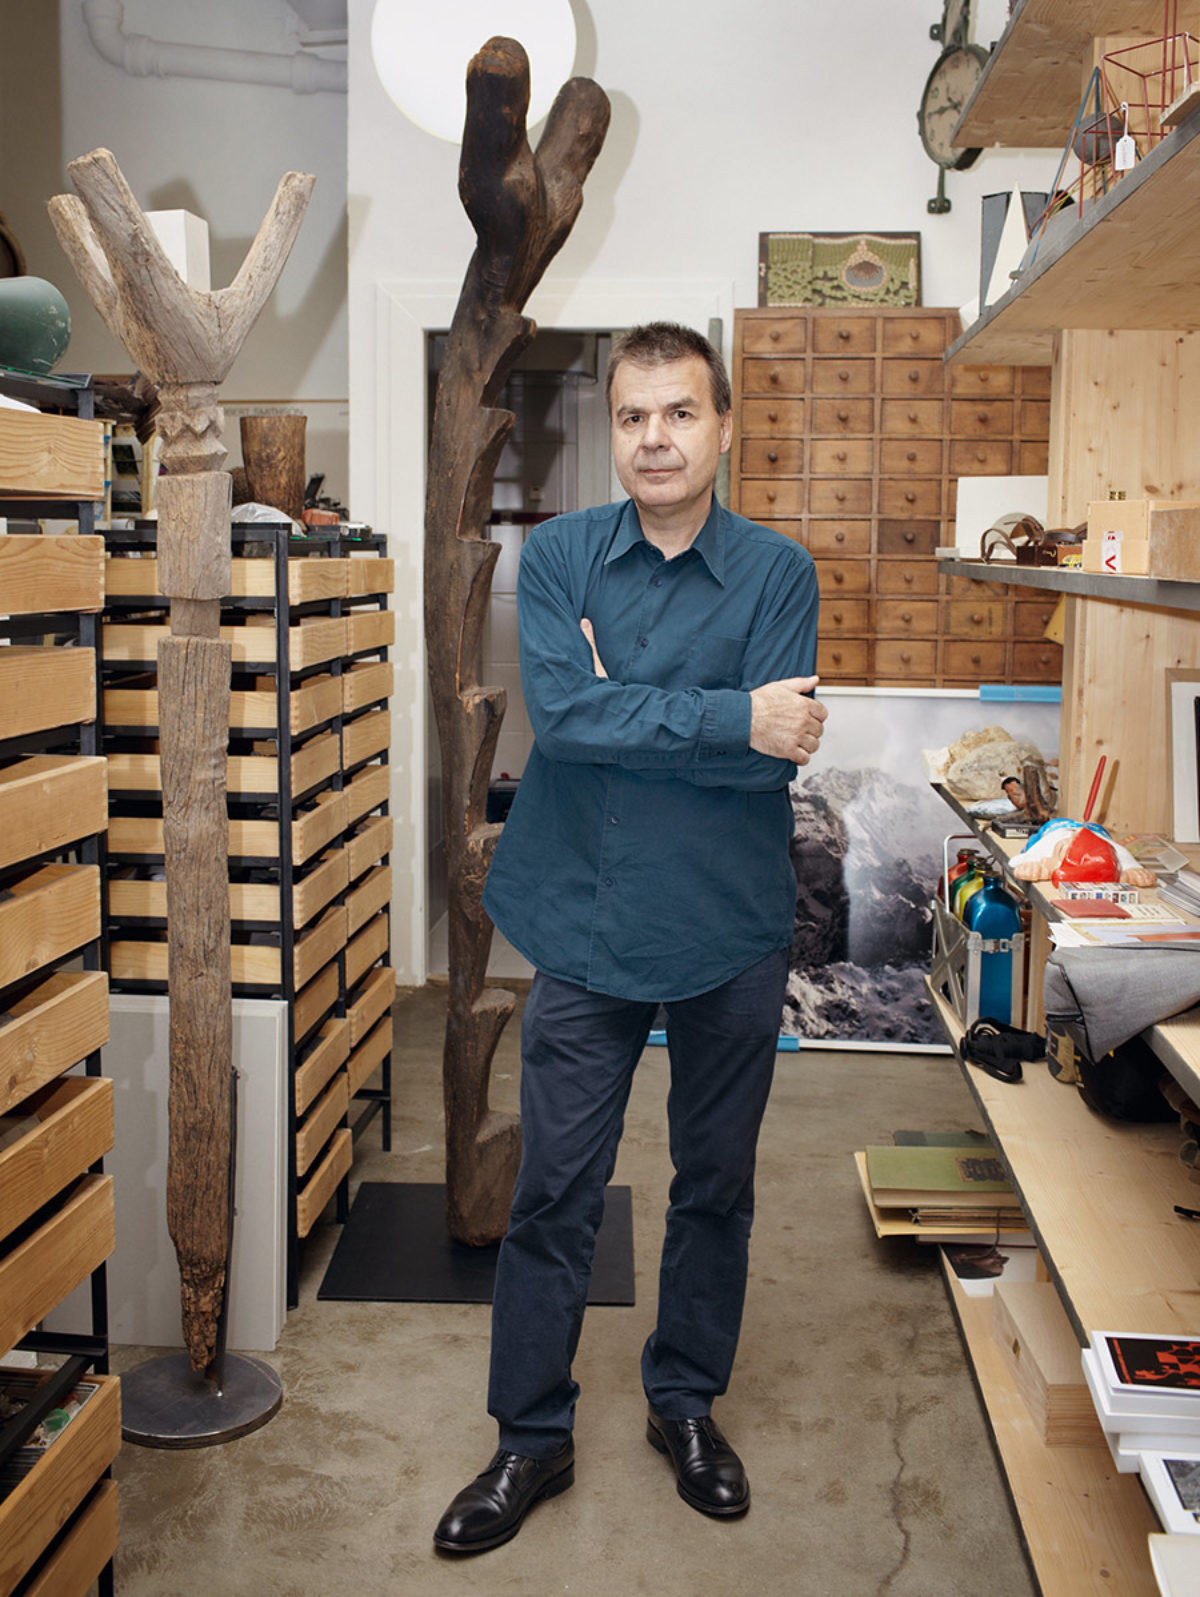 Günther Vogt standing in his workshop surrounded by shelving